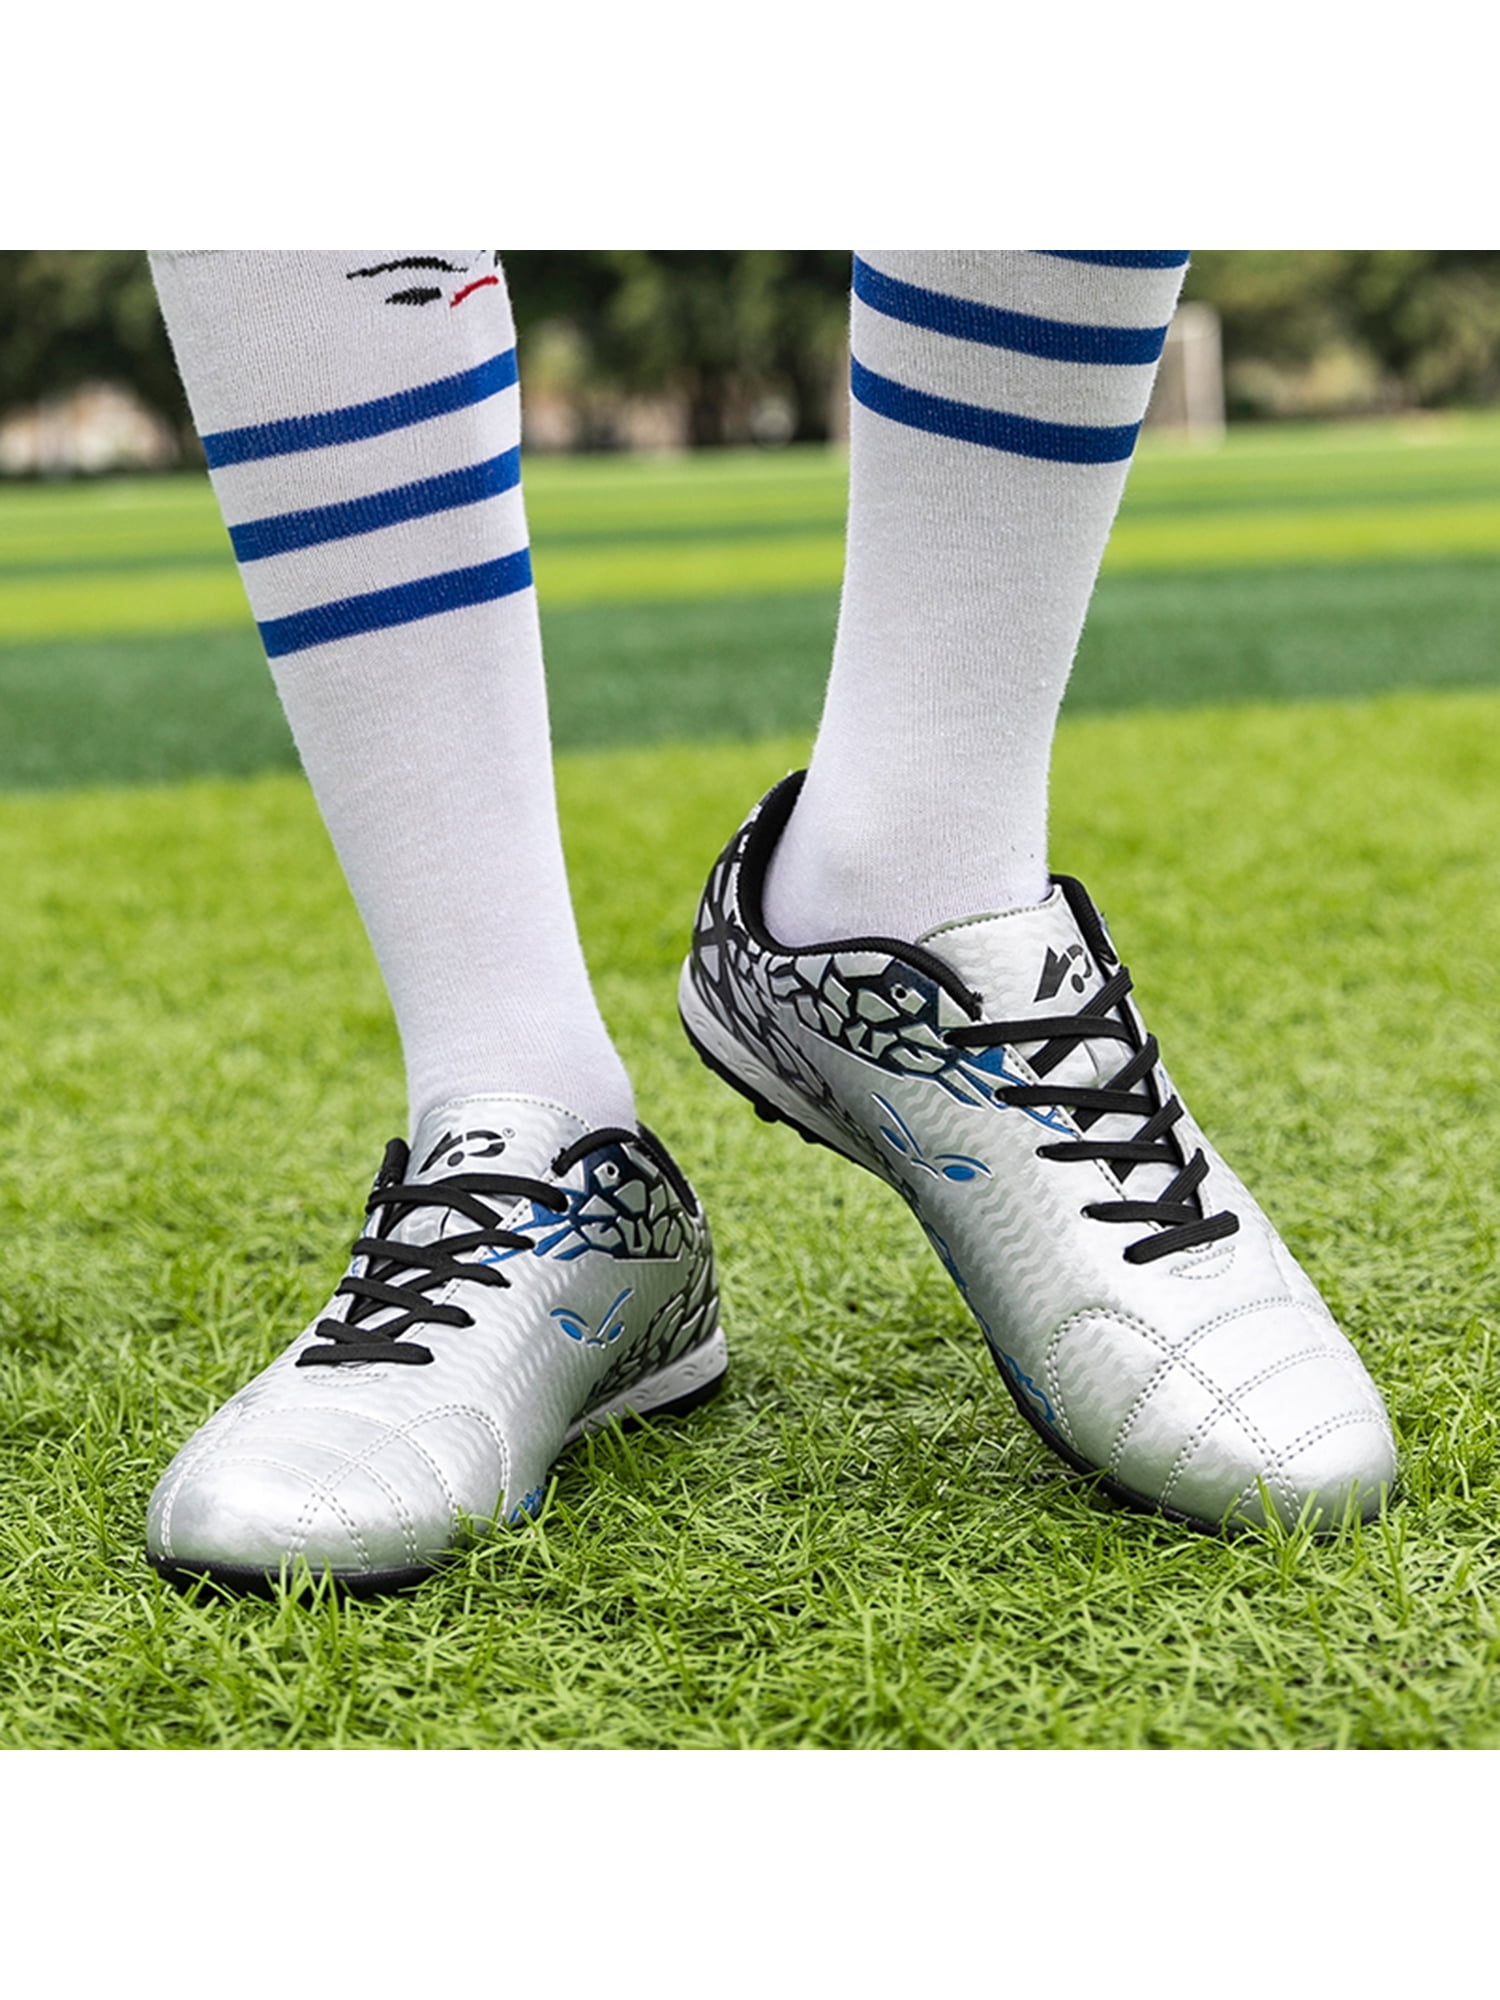 Boys Girls Soccer Shoes Outdoor Indoor Football Shoes Youth Athletic Shoes 